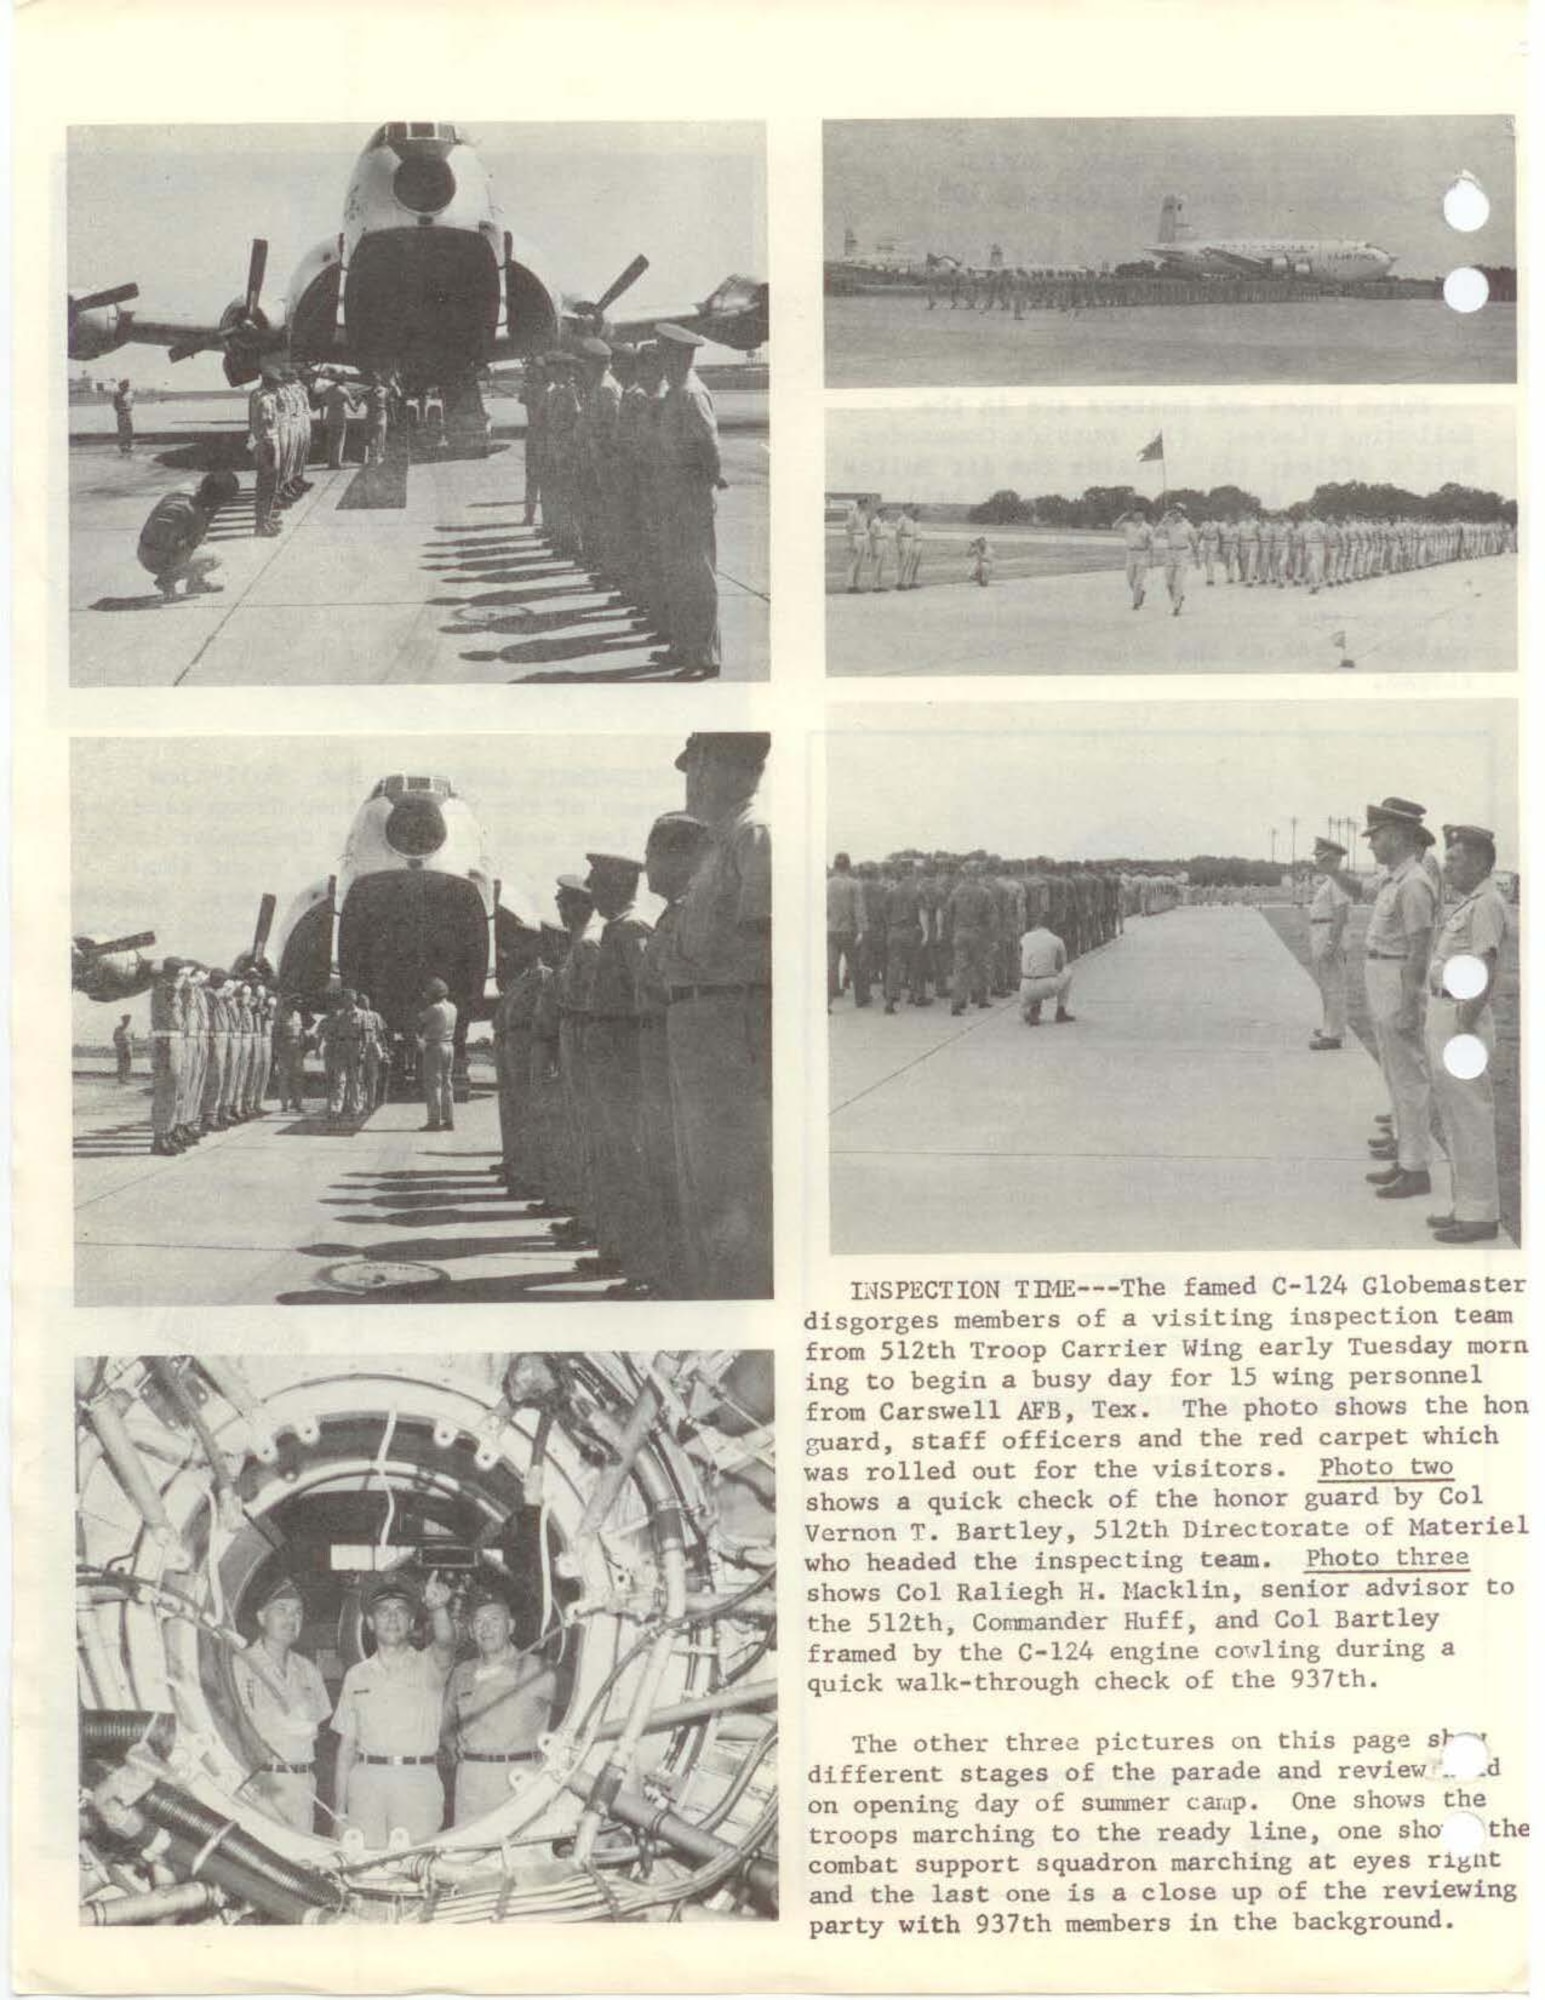 This is an excerpt of the Sooner Newspaper from 1967 detailing an inspection of the 937th Military Airlift Group, U.S. Air Force Reserve.  The 937th Troop Carrier Group, (later the 937th Air Transport Group and then 937th Military Airlift Group) activated here on January 17, 1963, due to a reorganization by Continental Air Command to better facilitate the mobilization of Reserve forces when needed. (U.S. Air Force Photo)